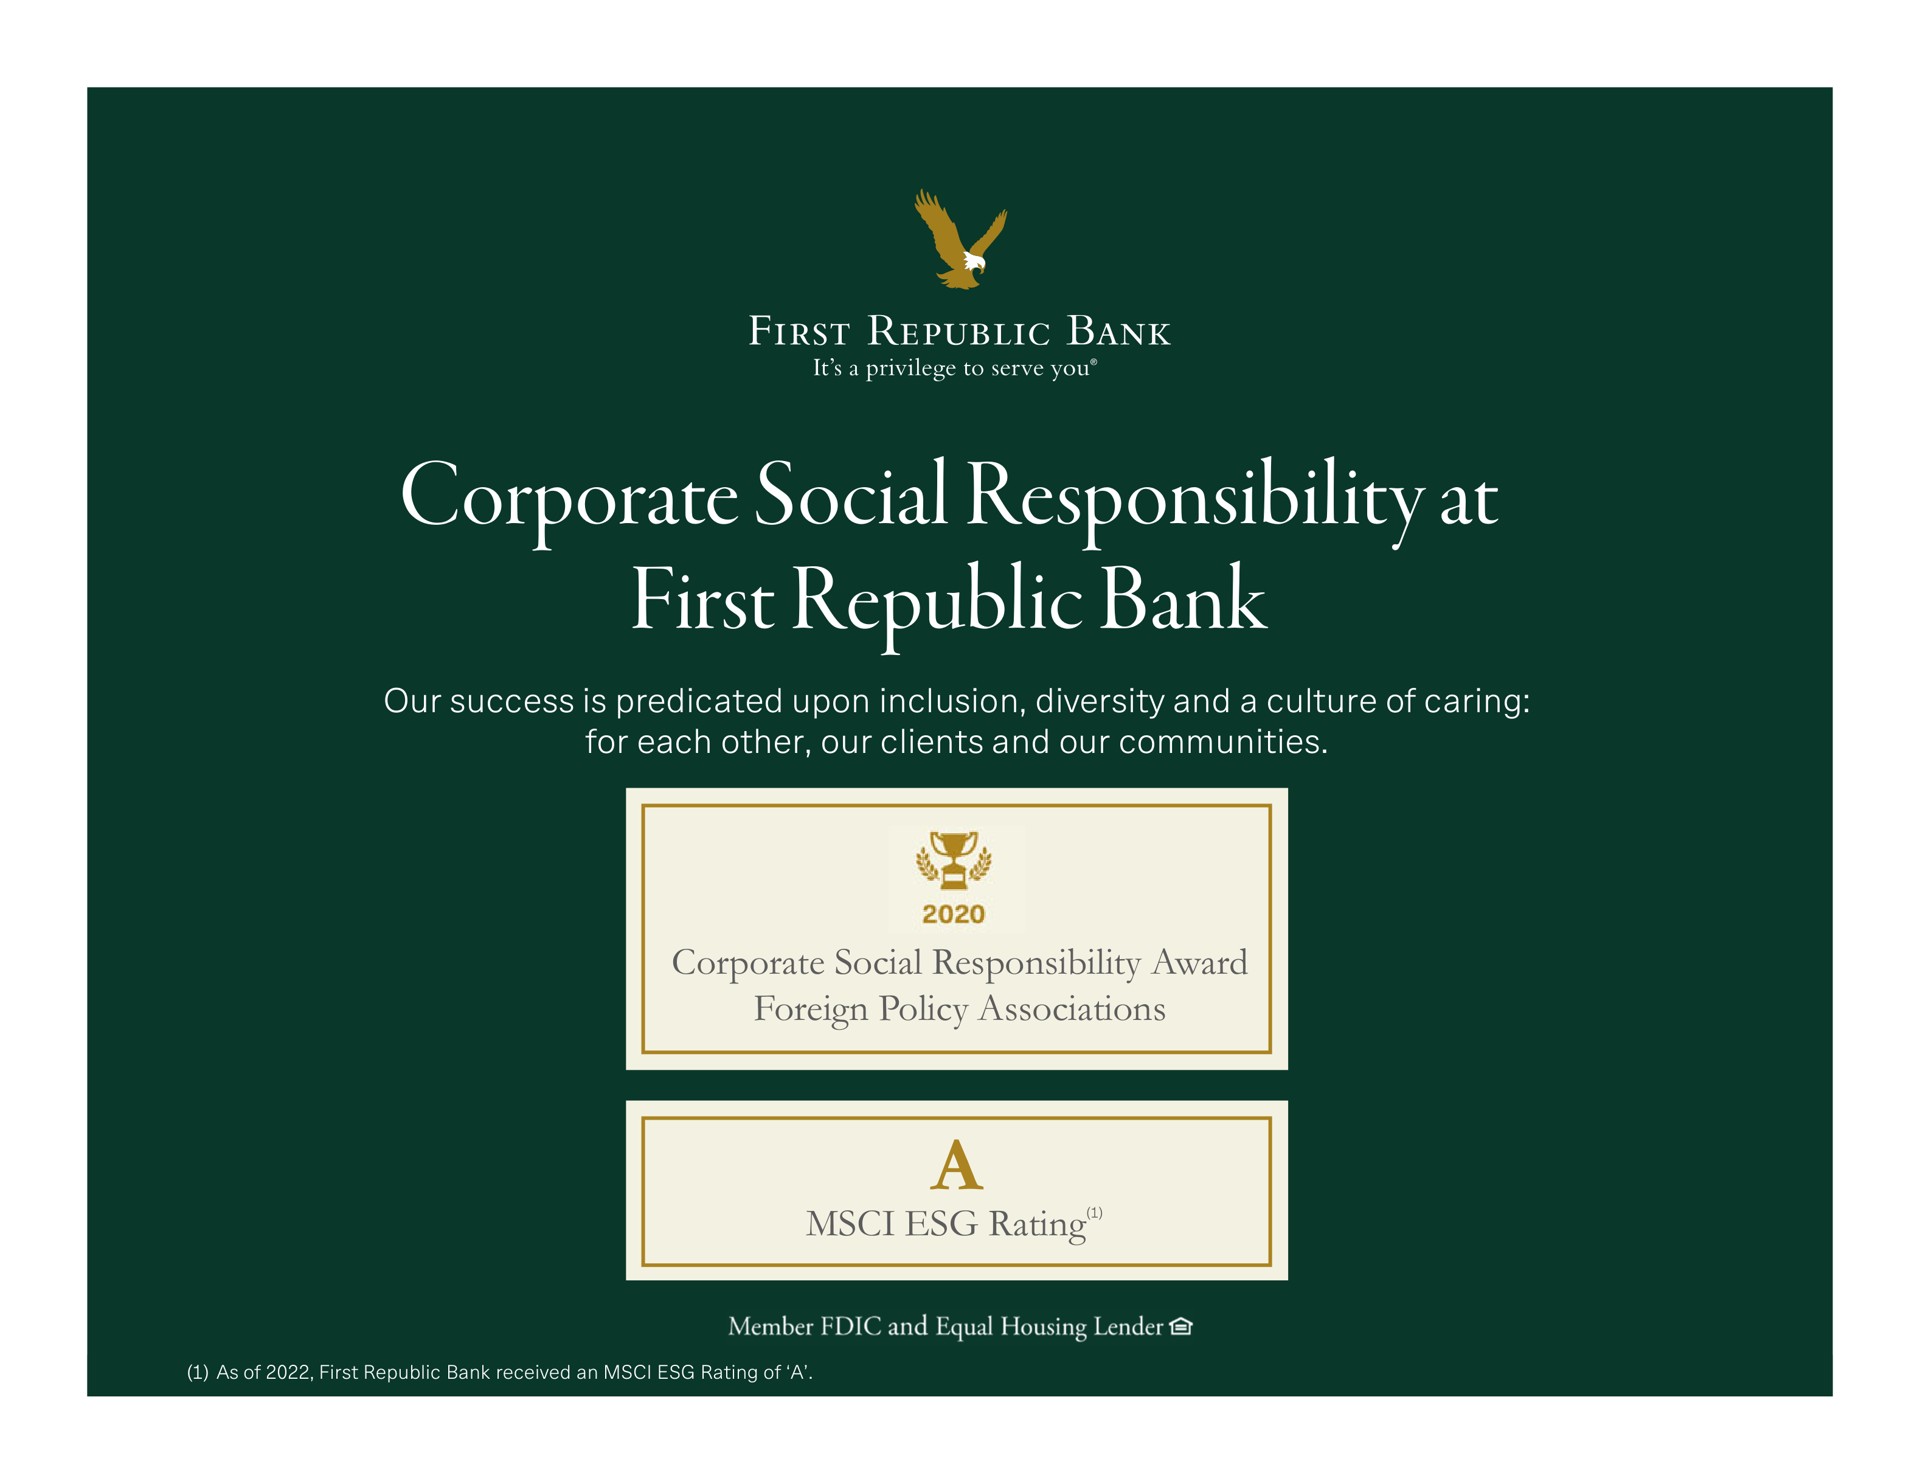 corporate social responsibility at first republic bank a award foreign policy associations | First Republic Bank